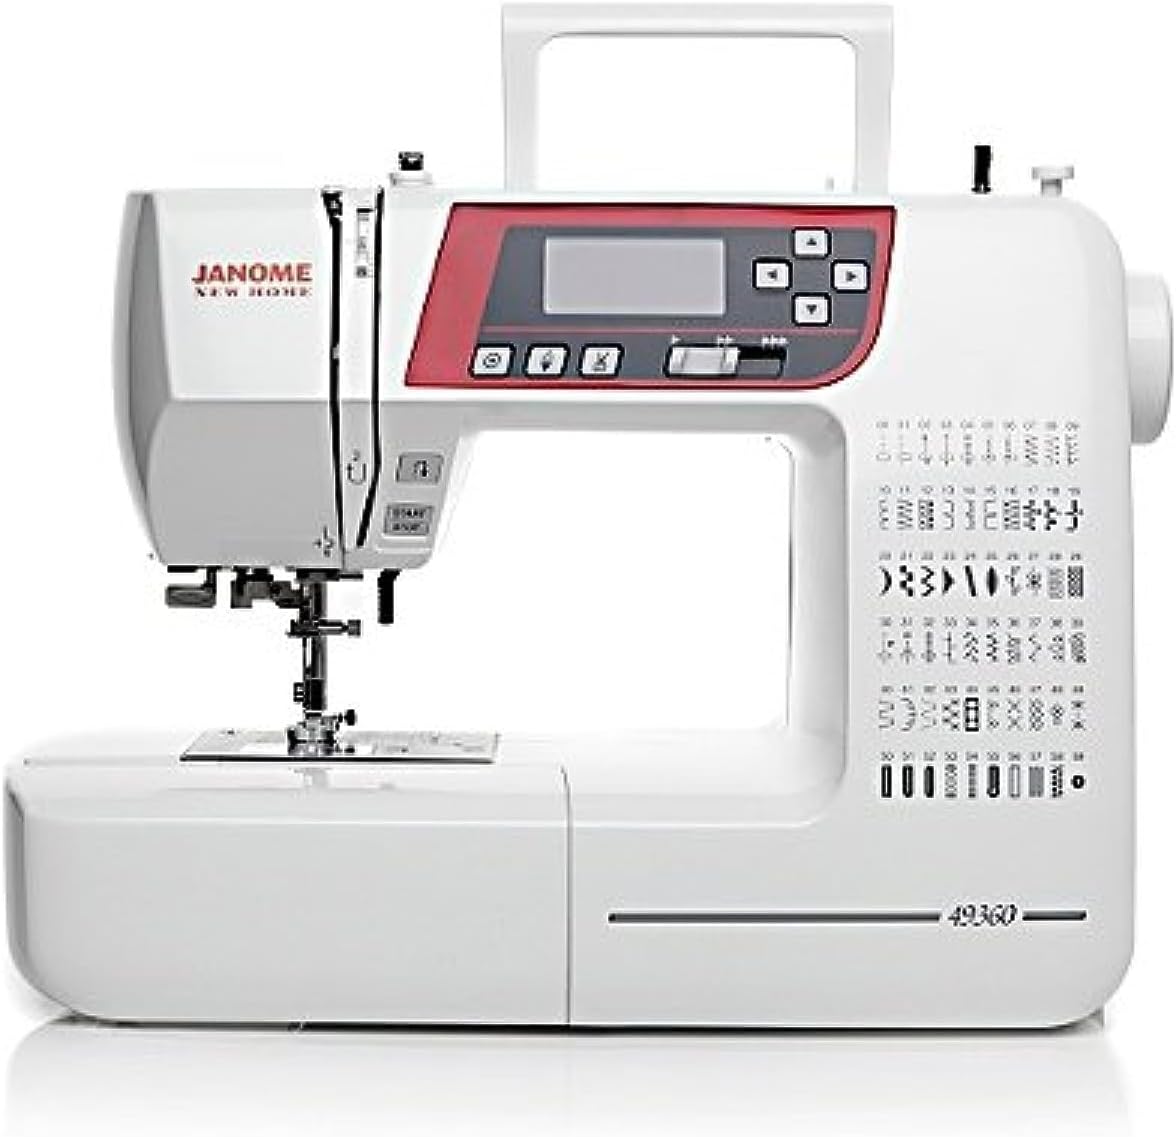 Janome 49360 new home Computerized Sewing Machine